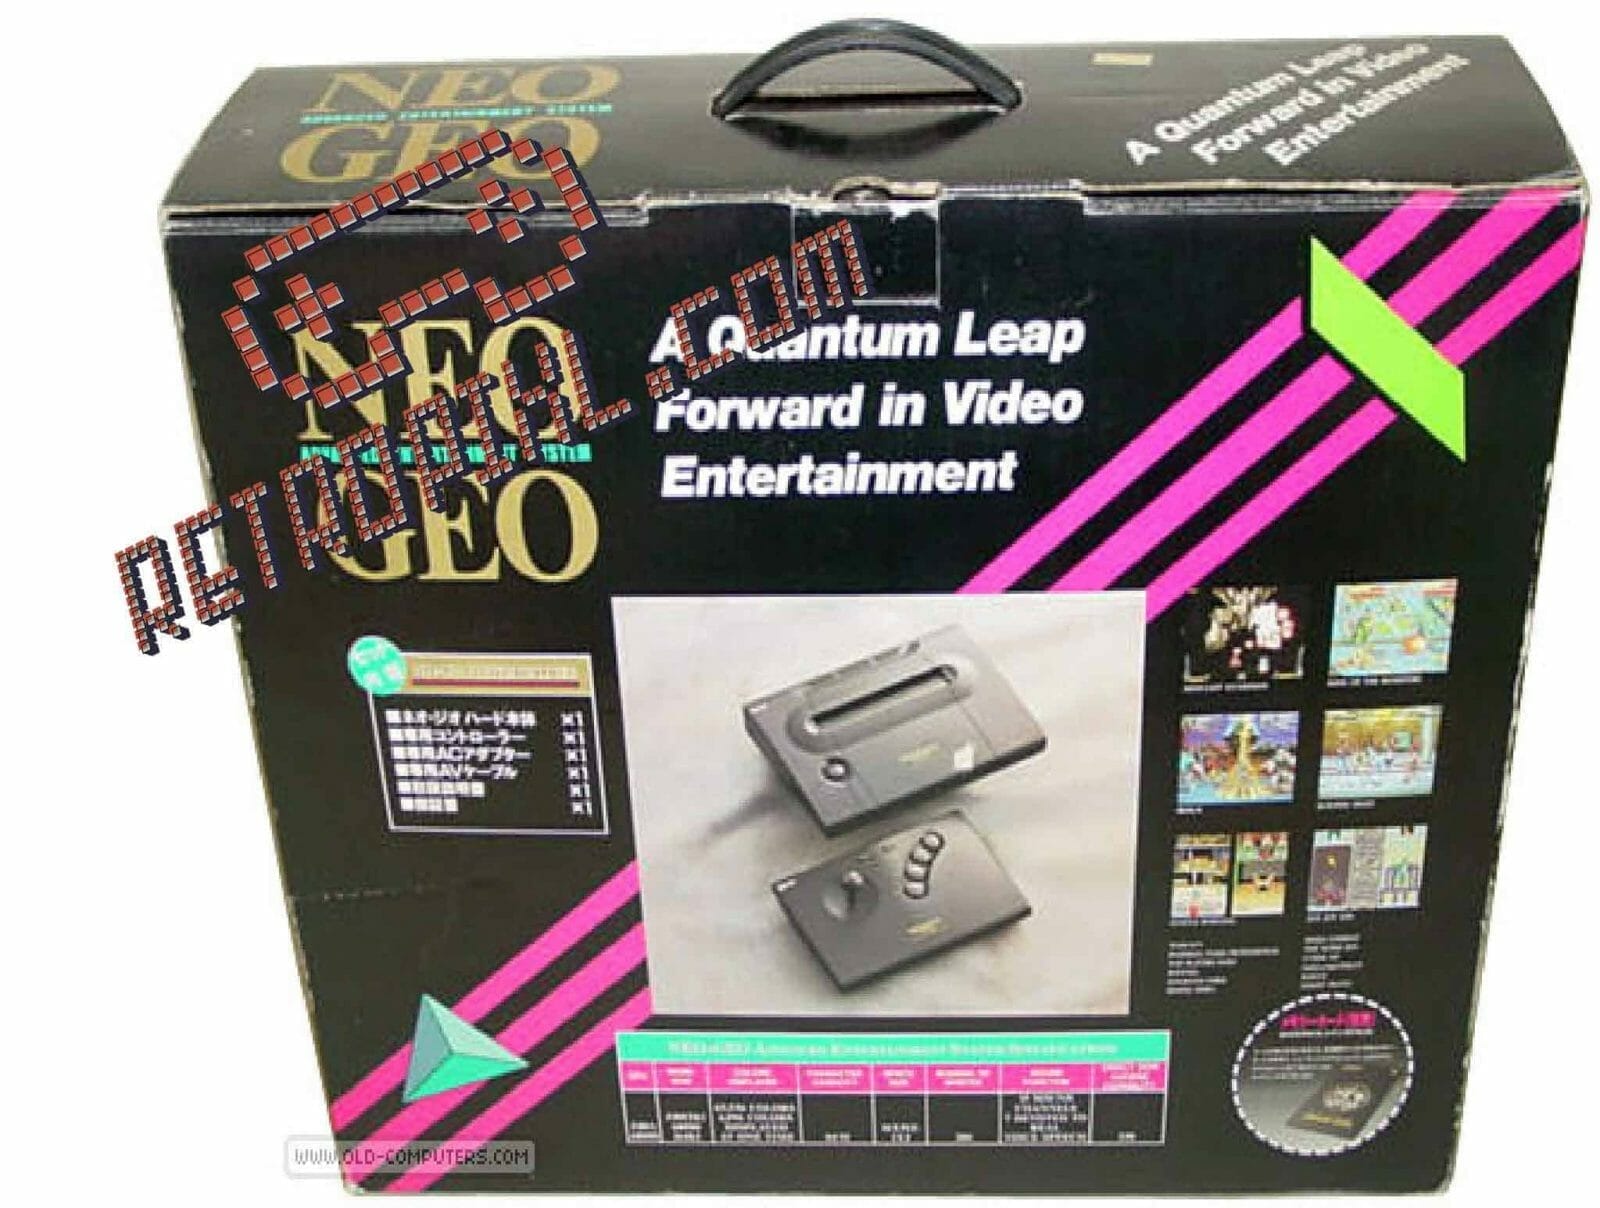 An image showing the packaging for the neo geo